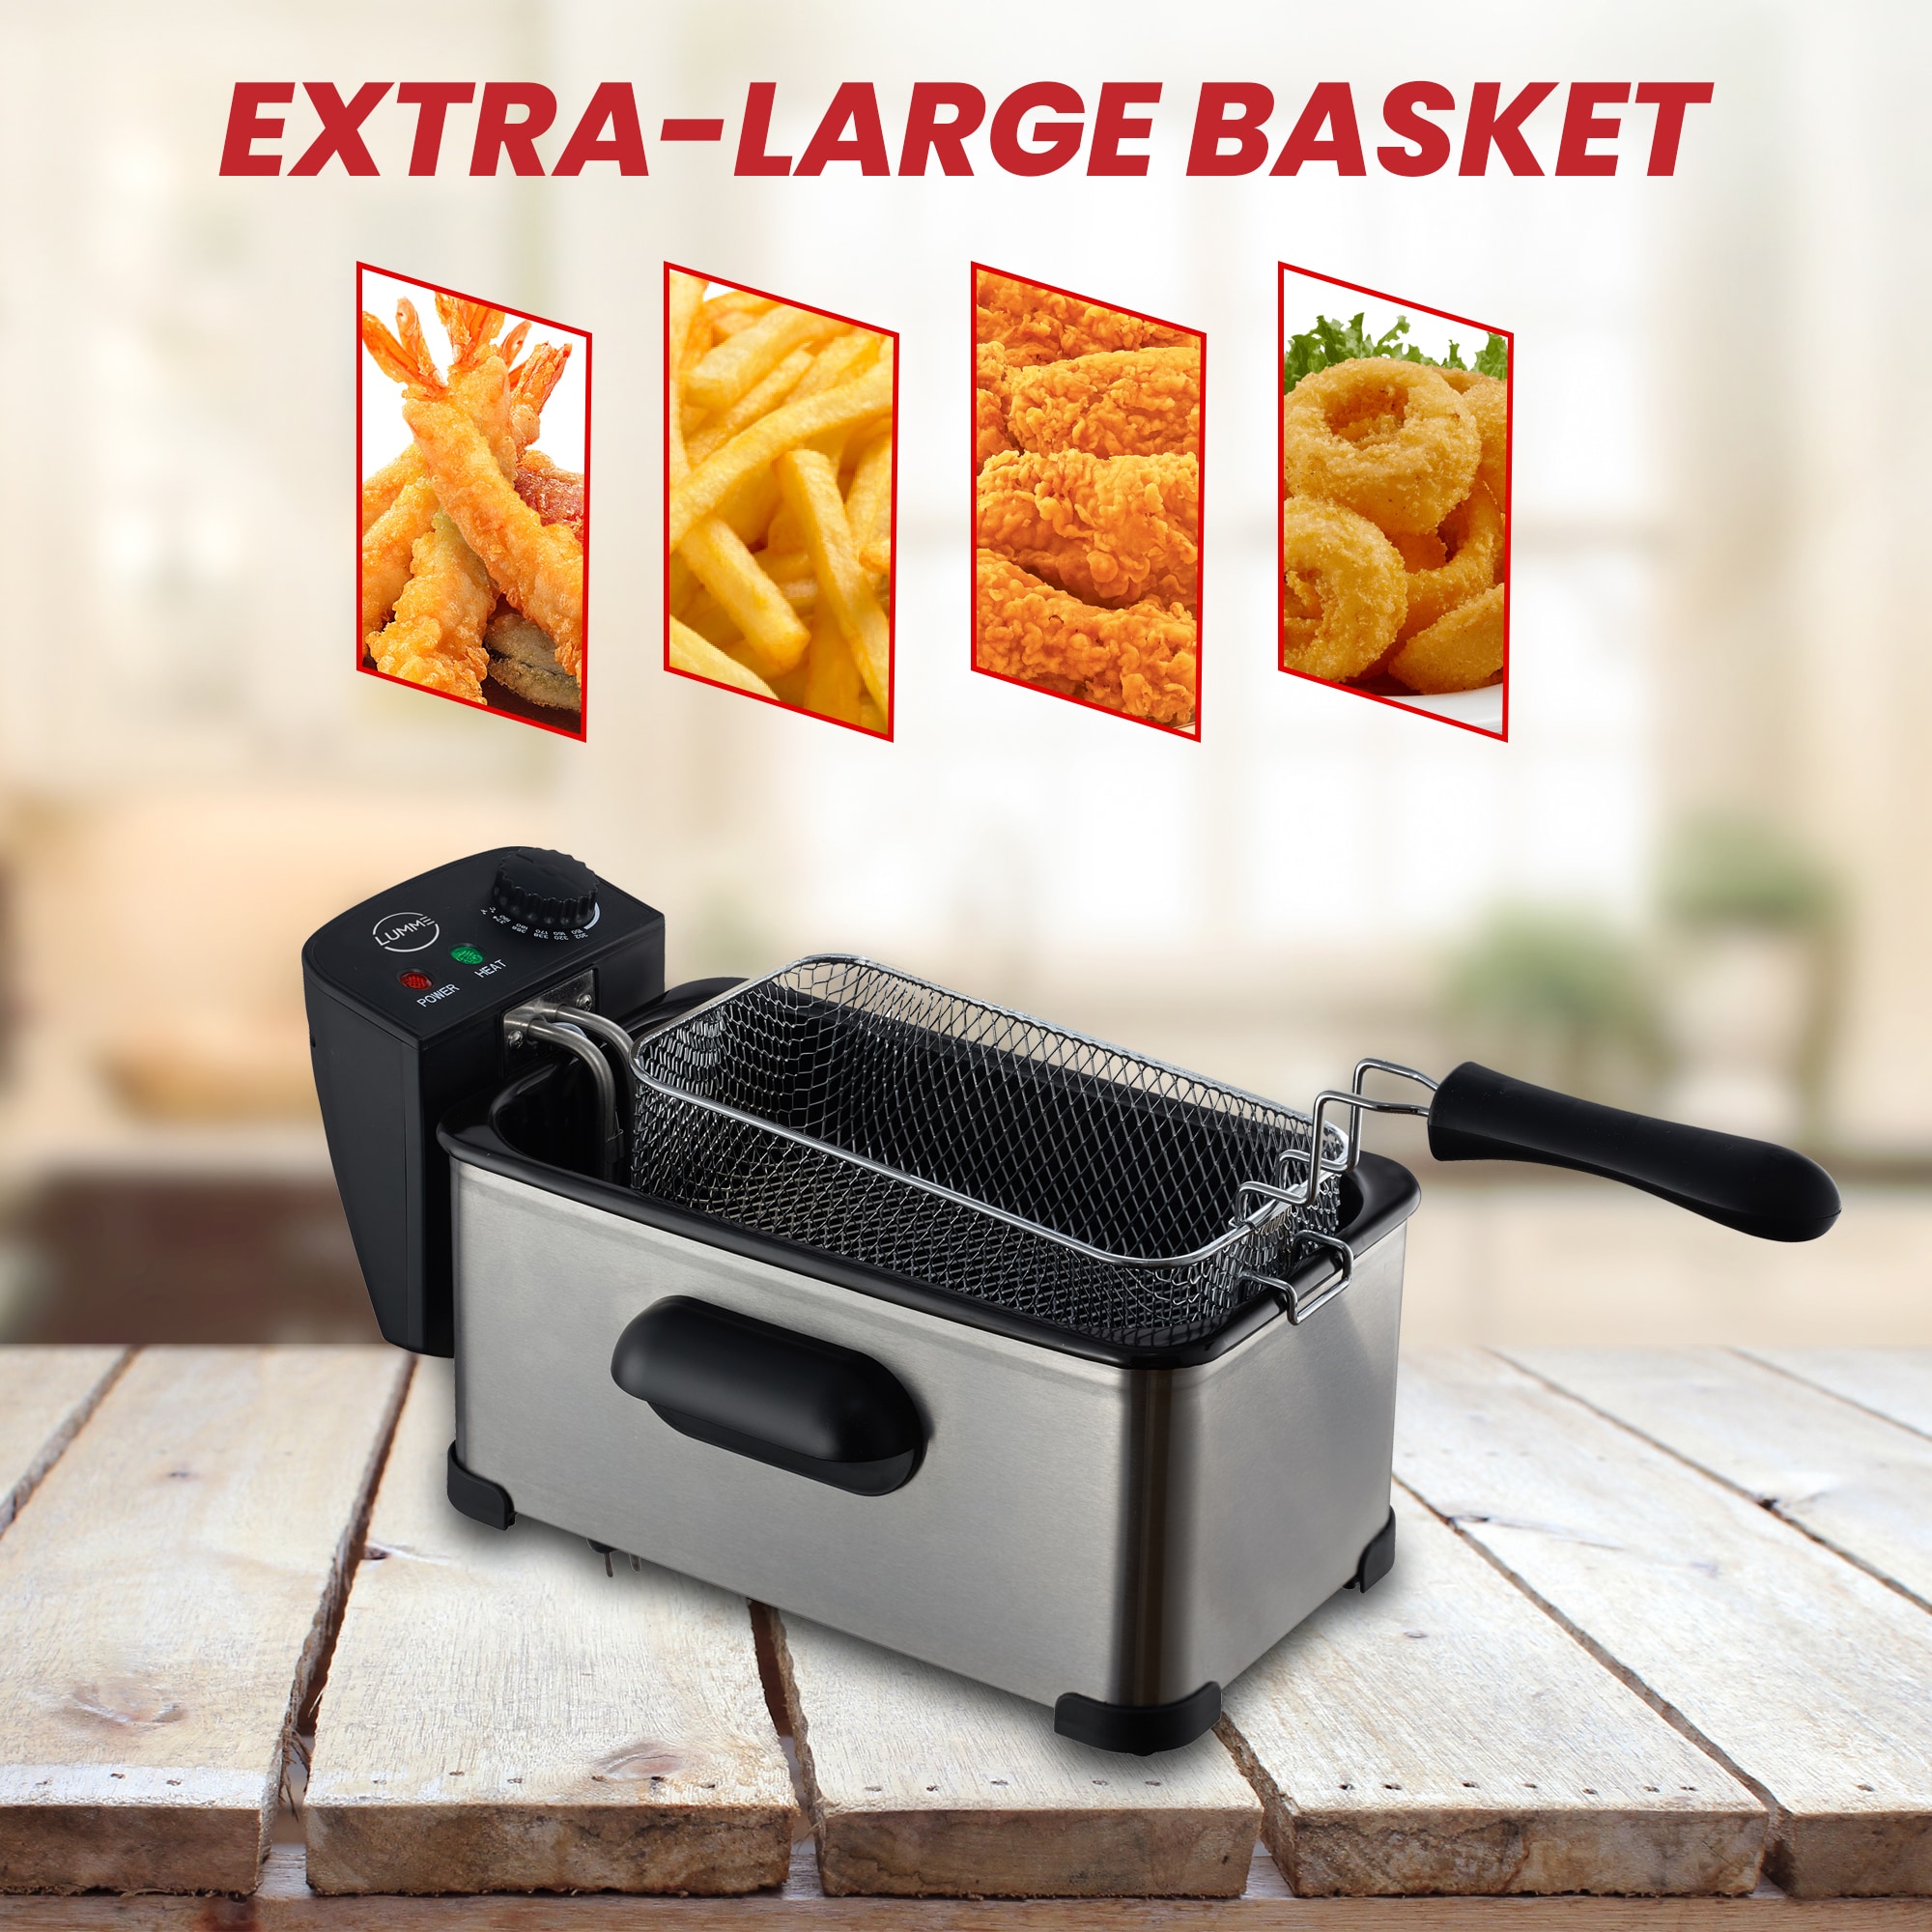 Professional Series Classic Deep Fryer 3 Lt Stainless Steel - Removable Fry  Basket, Variable Temperature Controls - ETL Listed in the Deep Fryers  department at